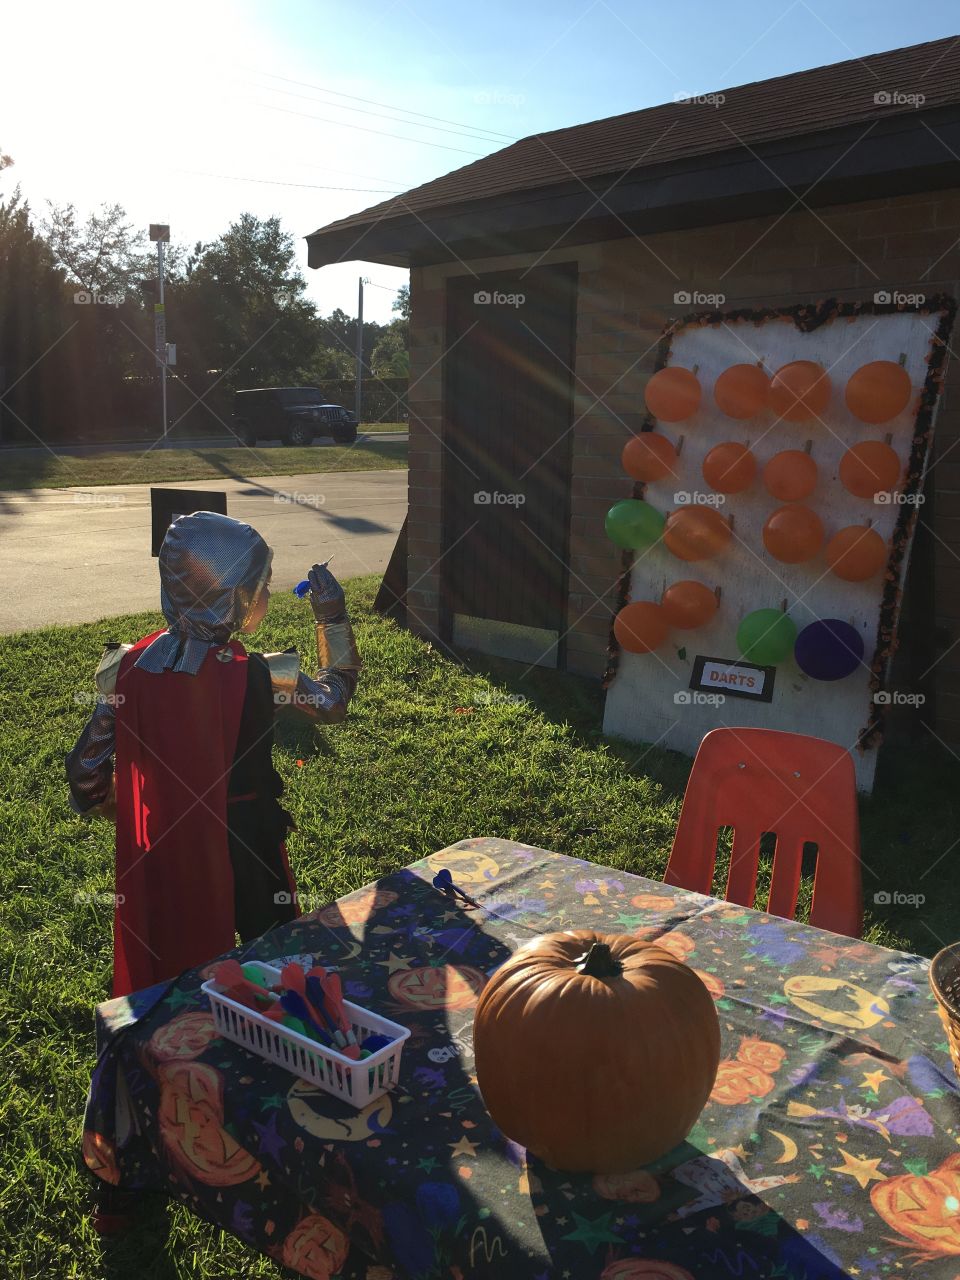 The Knight who conquered the balloons at the Church  Halloween party. 